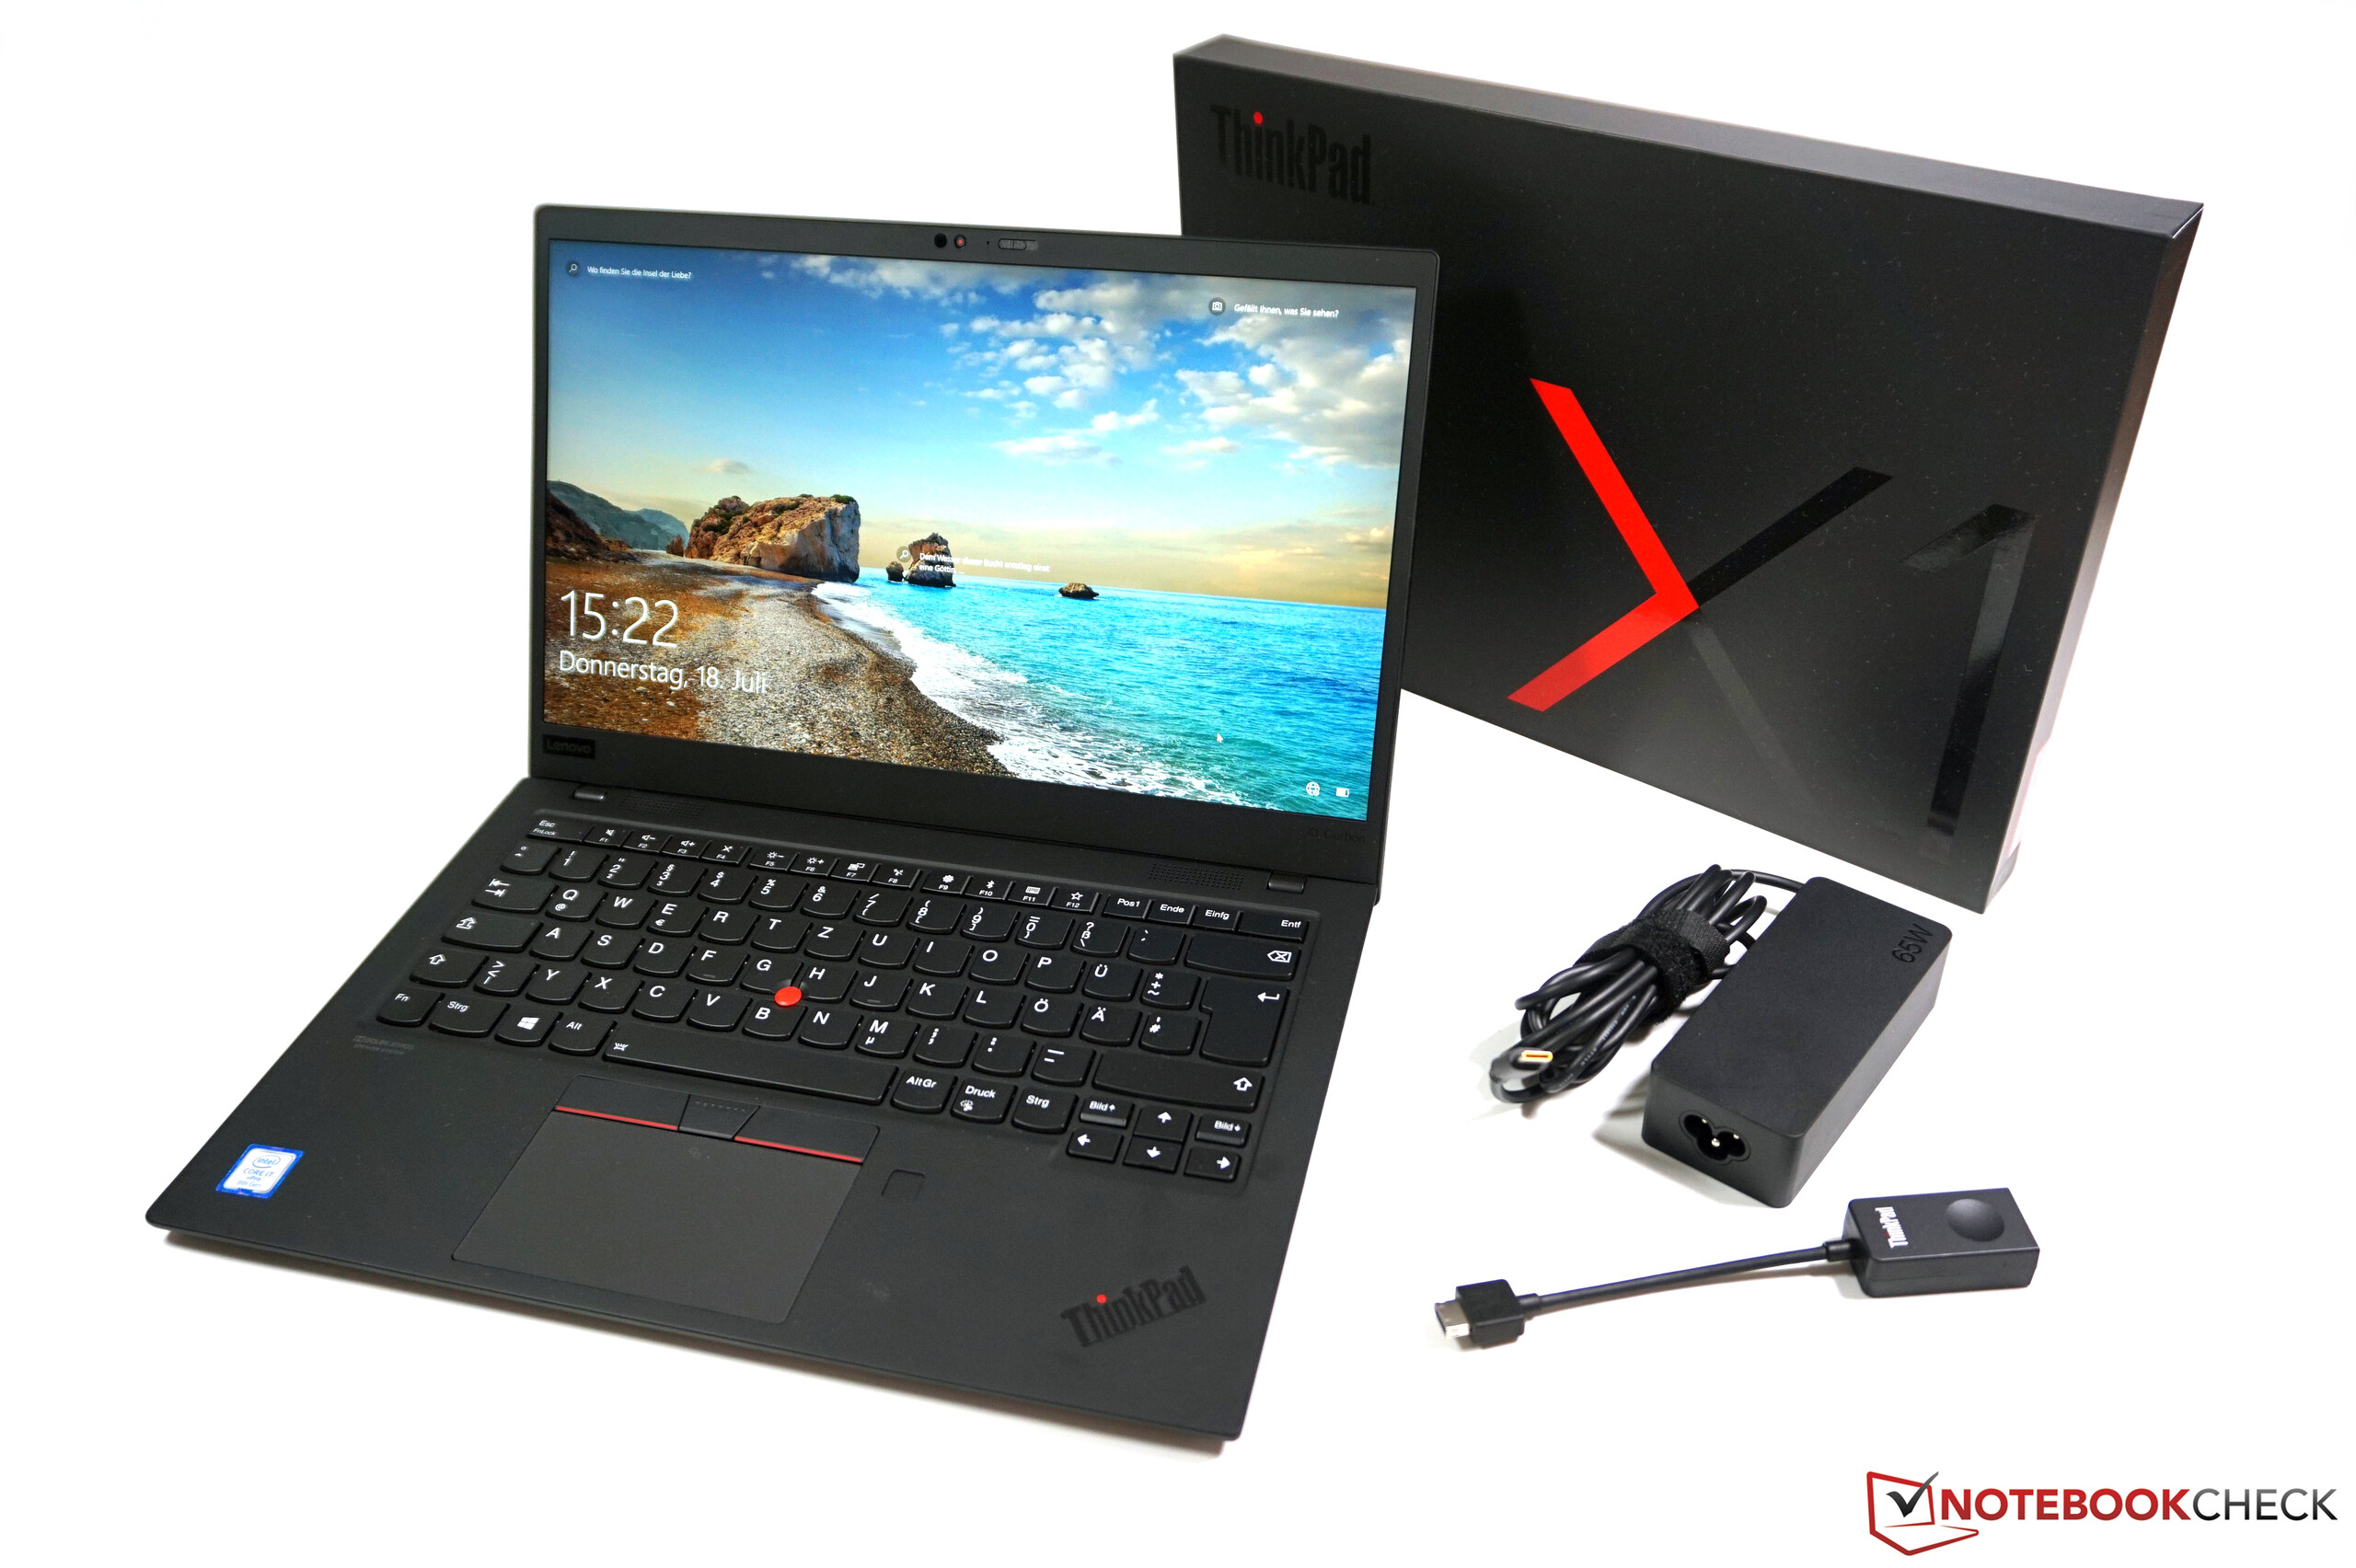 Lenovo ThinkPad X1 Carbon 2019 with Full HD laptop review